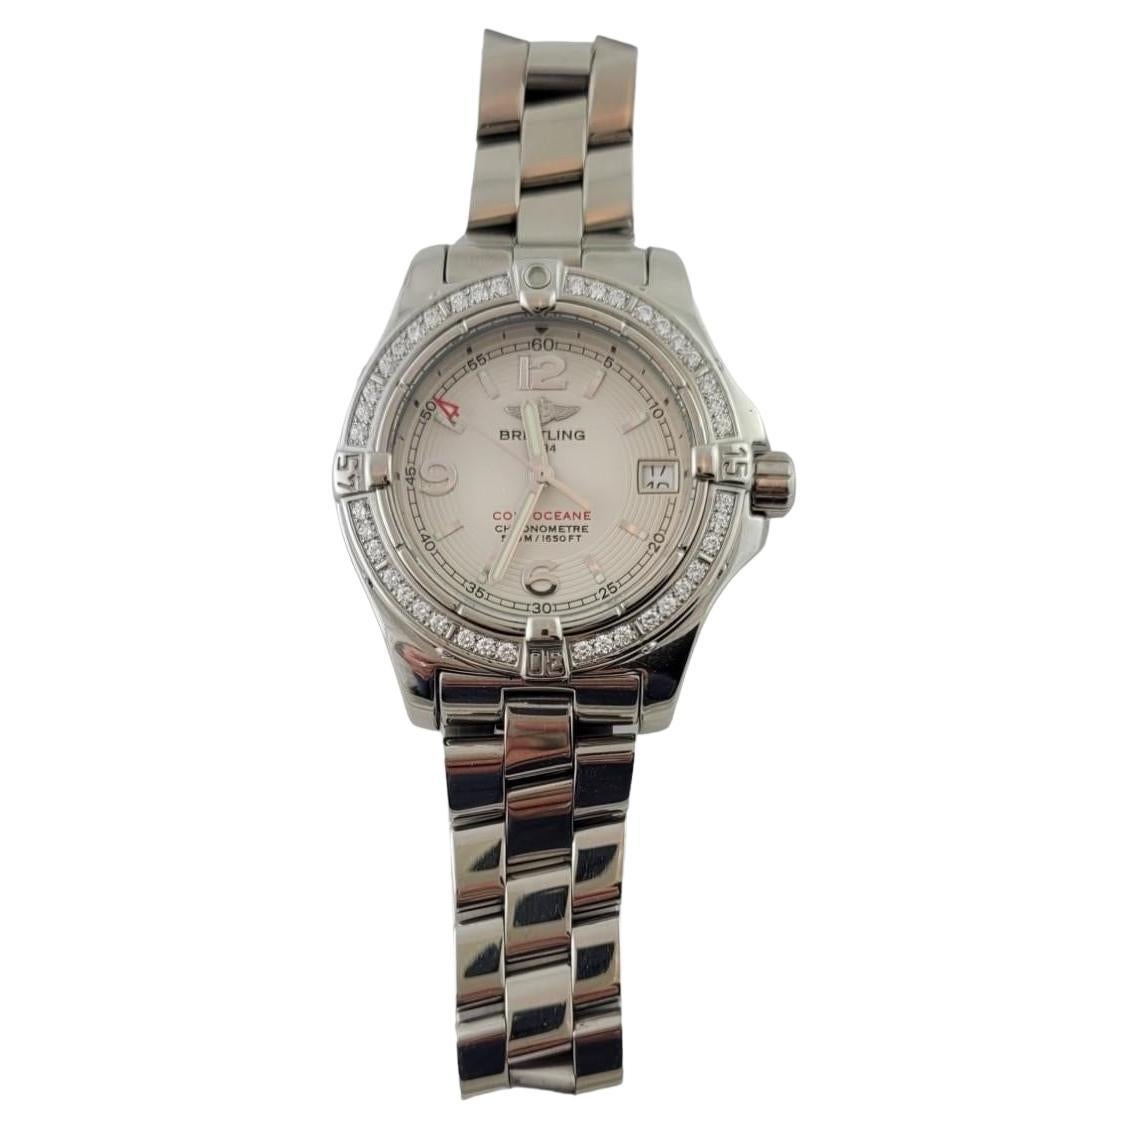 2007 Breitling Ladies Colt Oceane Diamond Watch A77380 Box/Papers # 17227